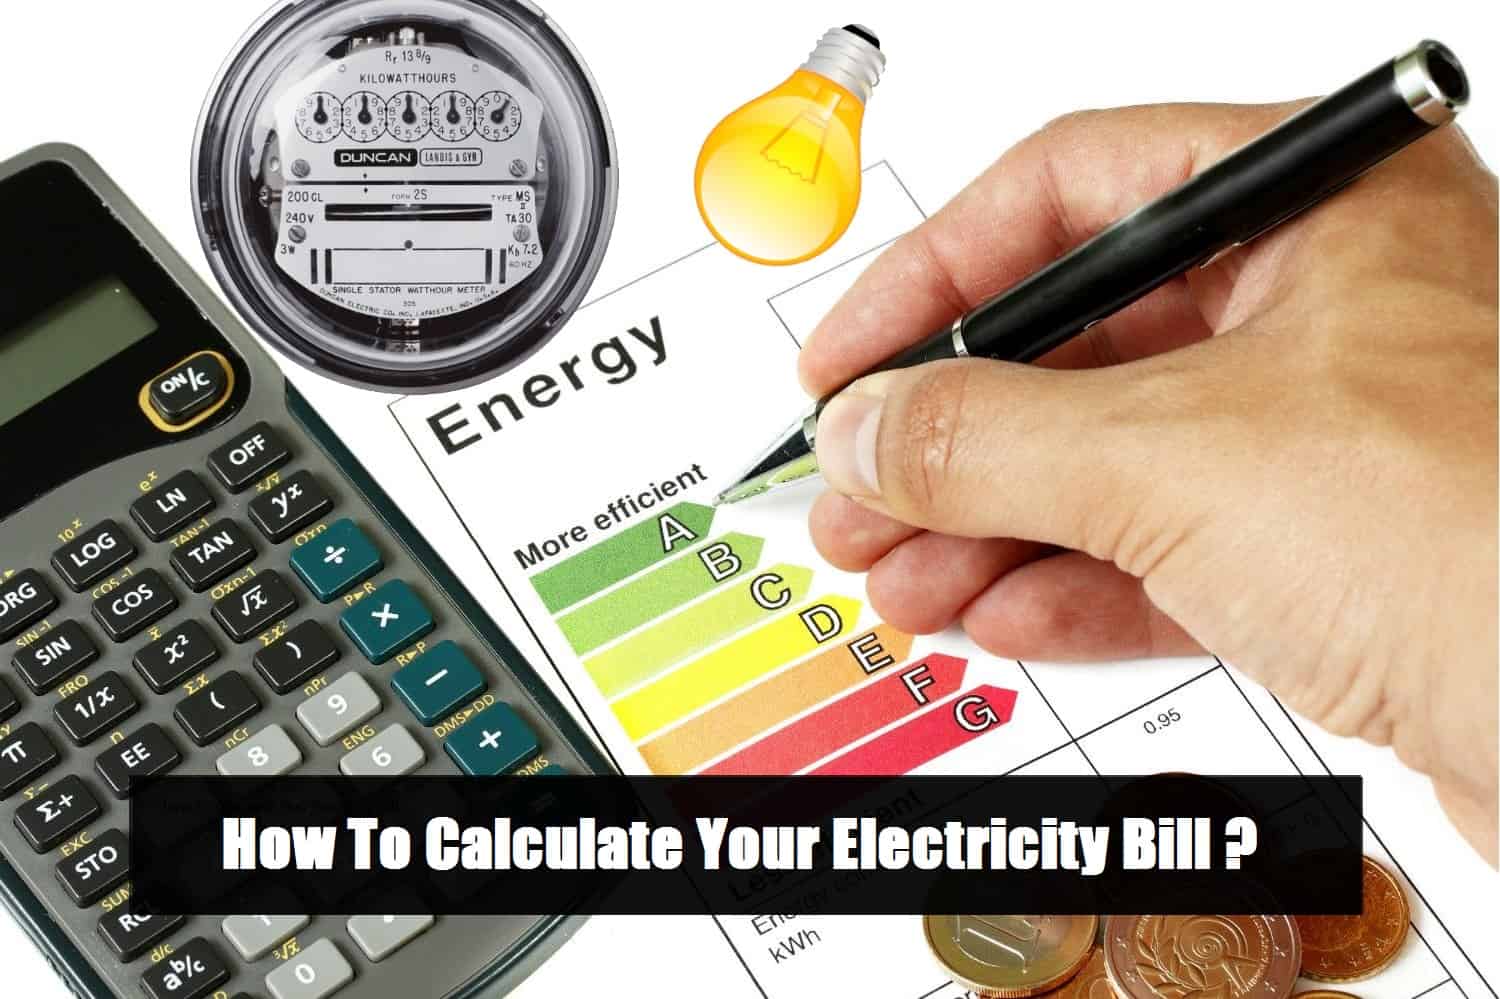 How is an electricity bill calculated?